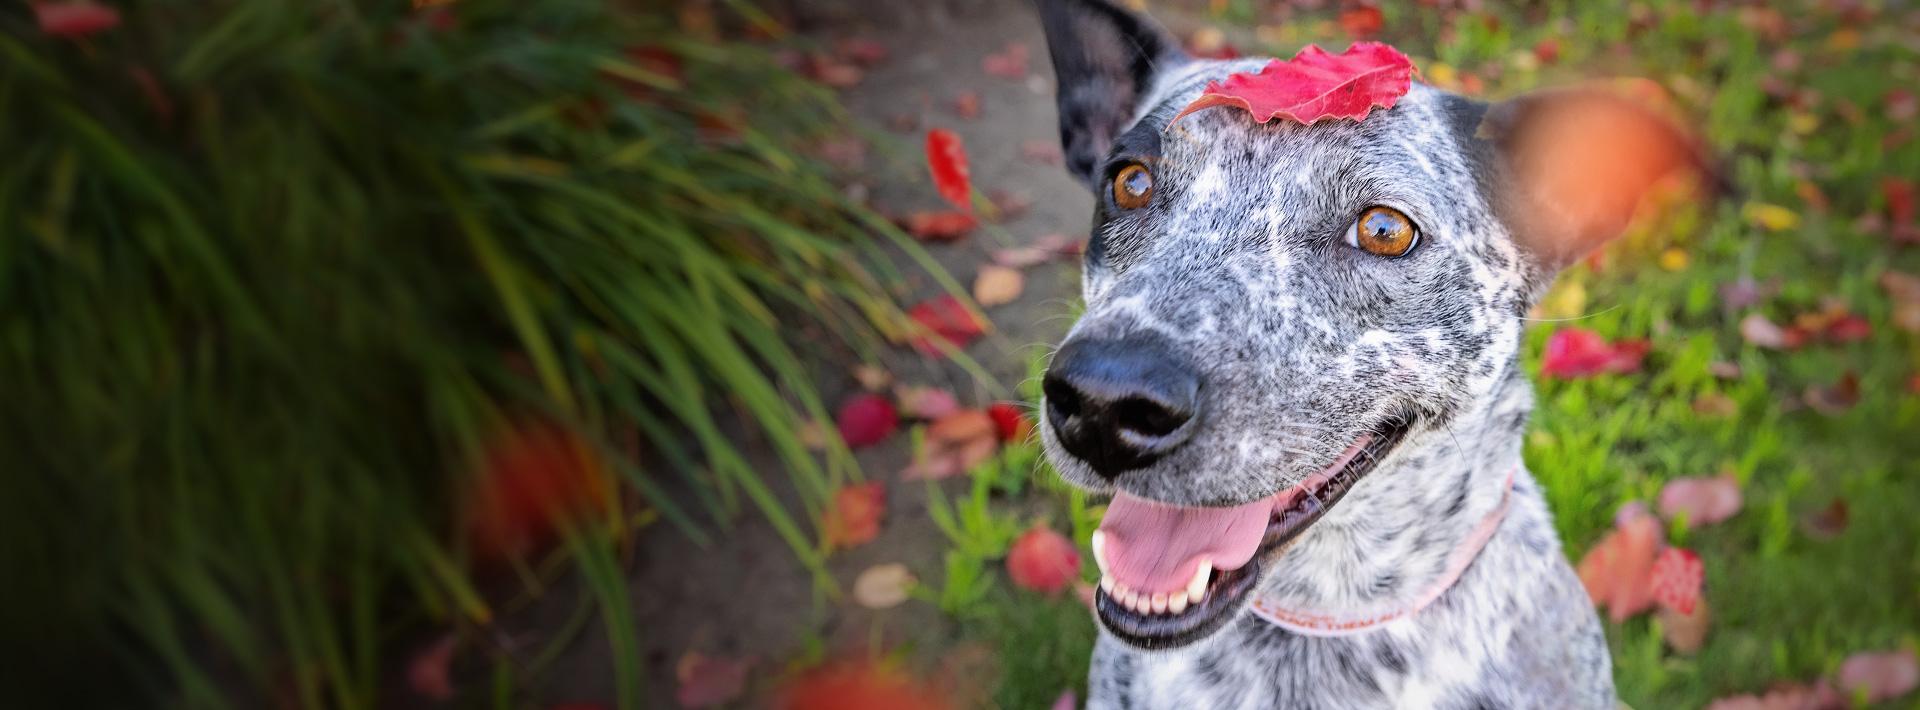 Smiling black and white heeler type dog with red leaf on top of head